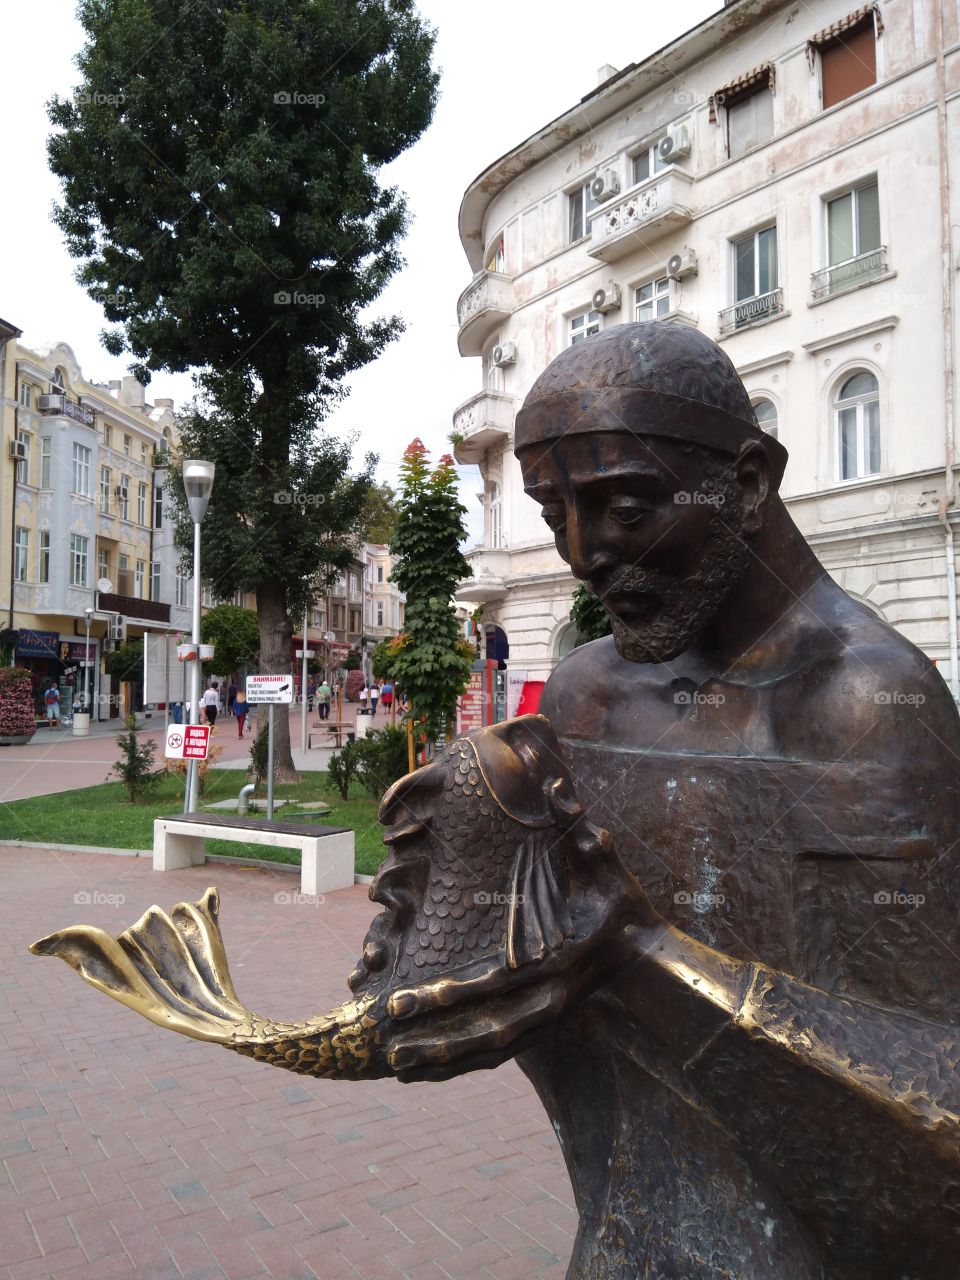 The fishman and the golden fish statue in Varna, Bulgaria